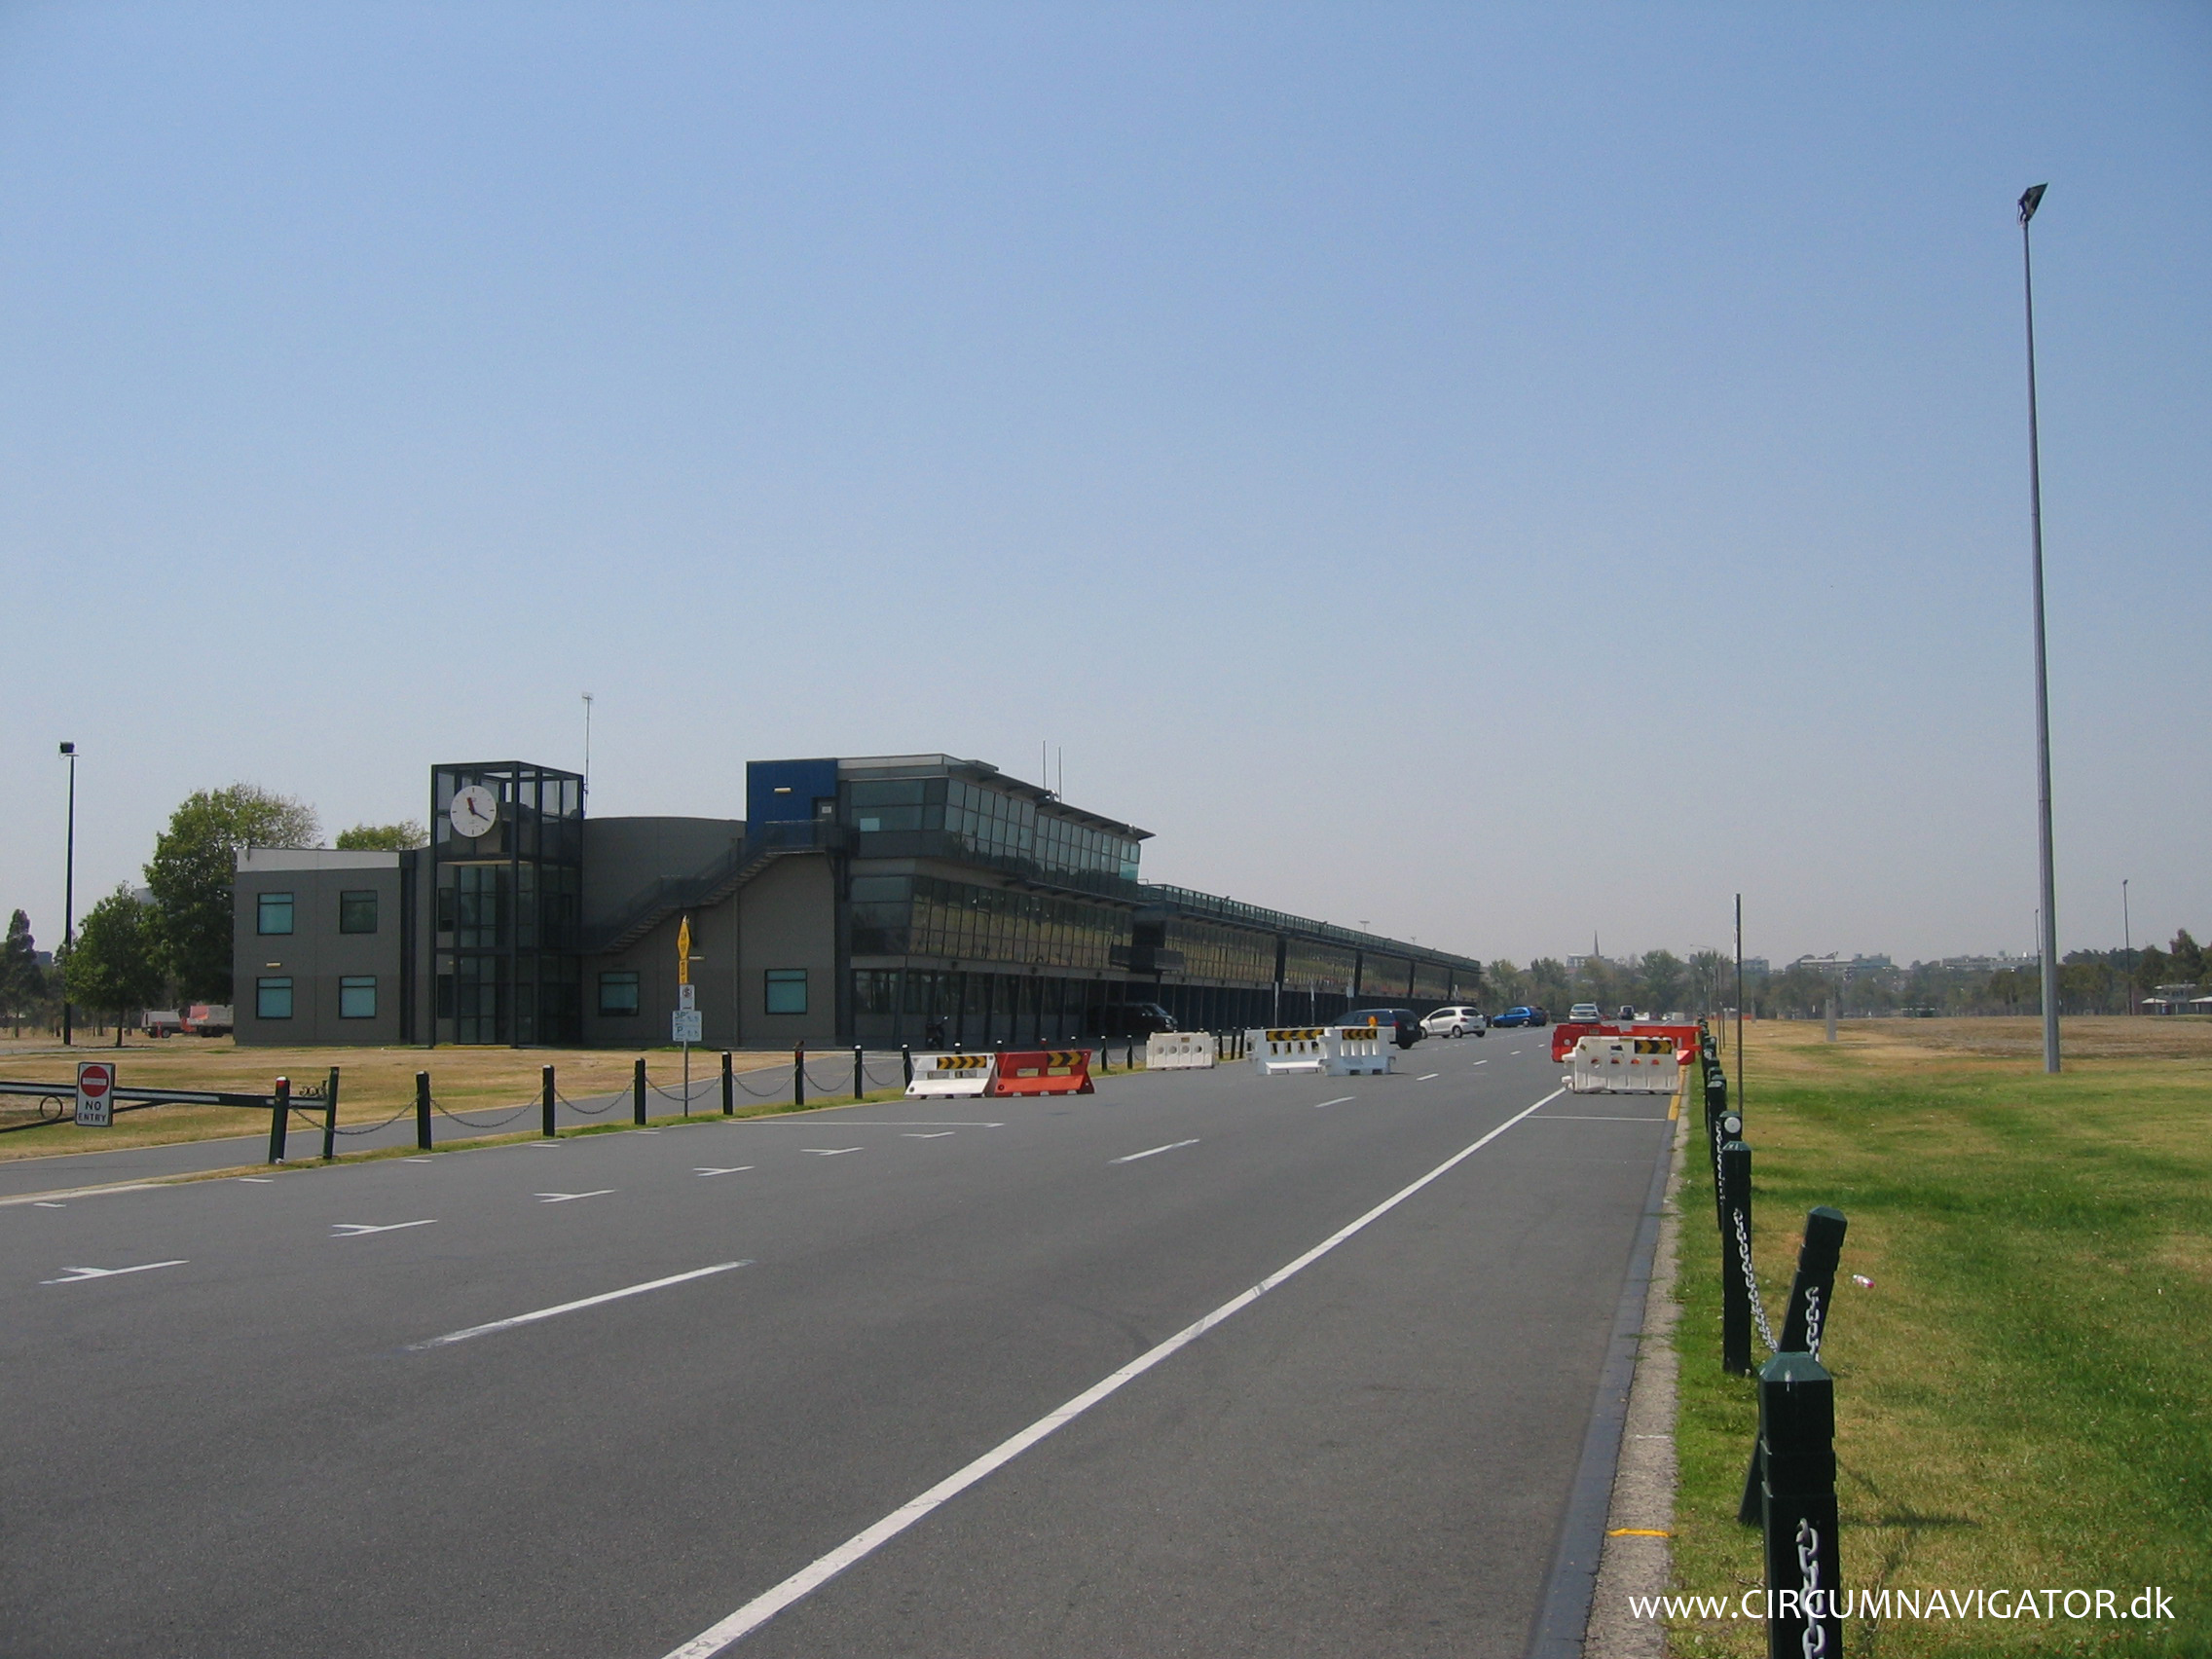 Driving the Formula 1 circuit in Melbourne